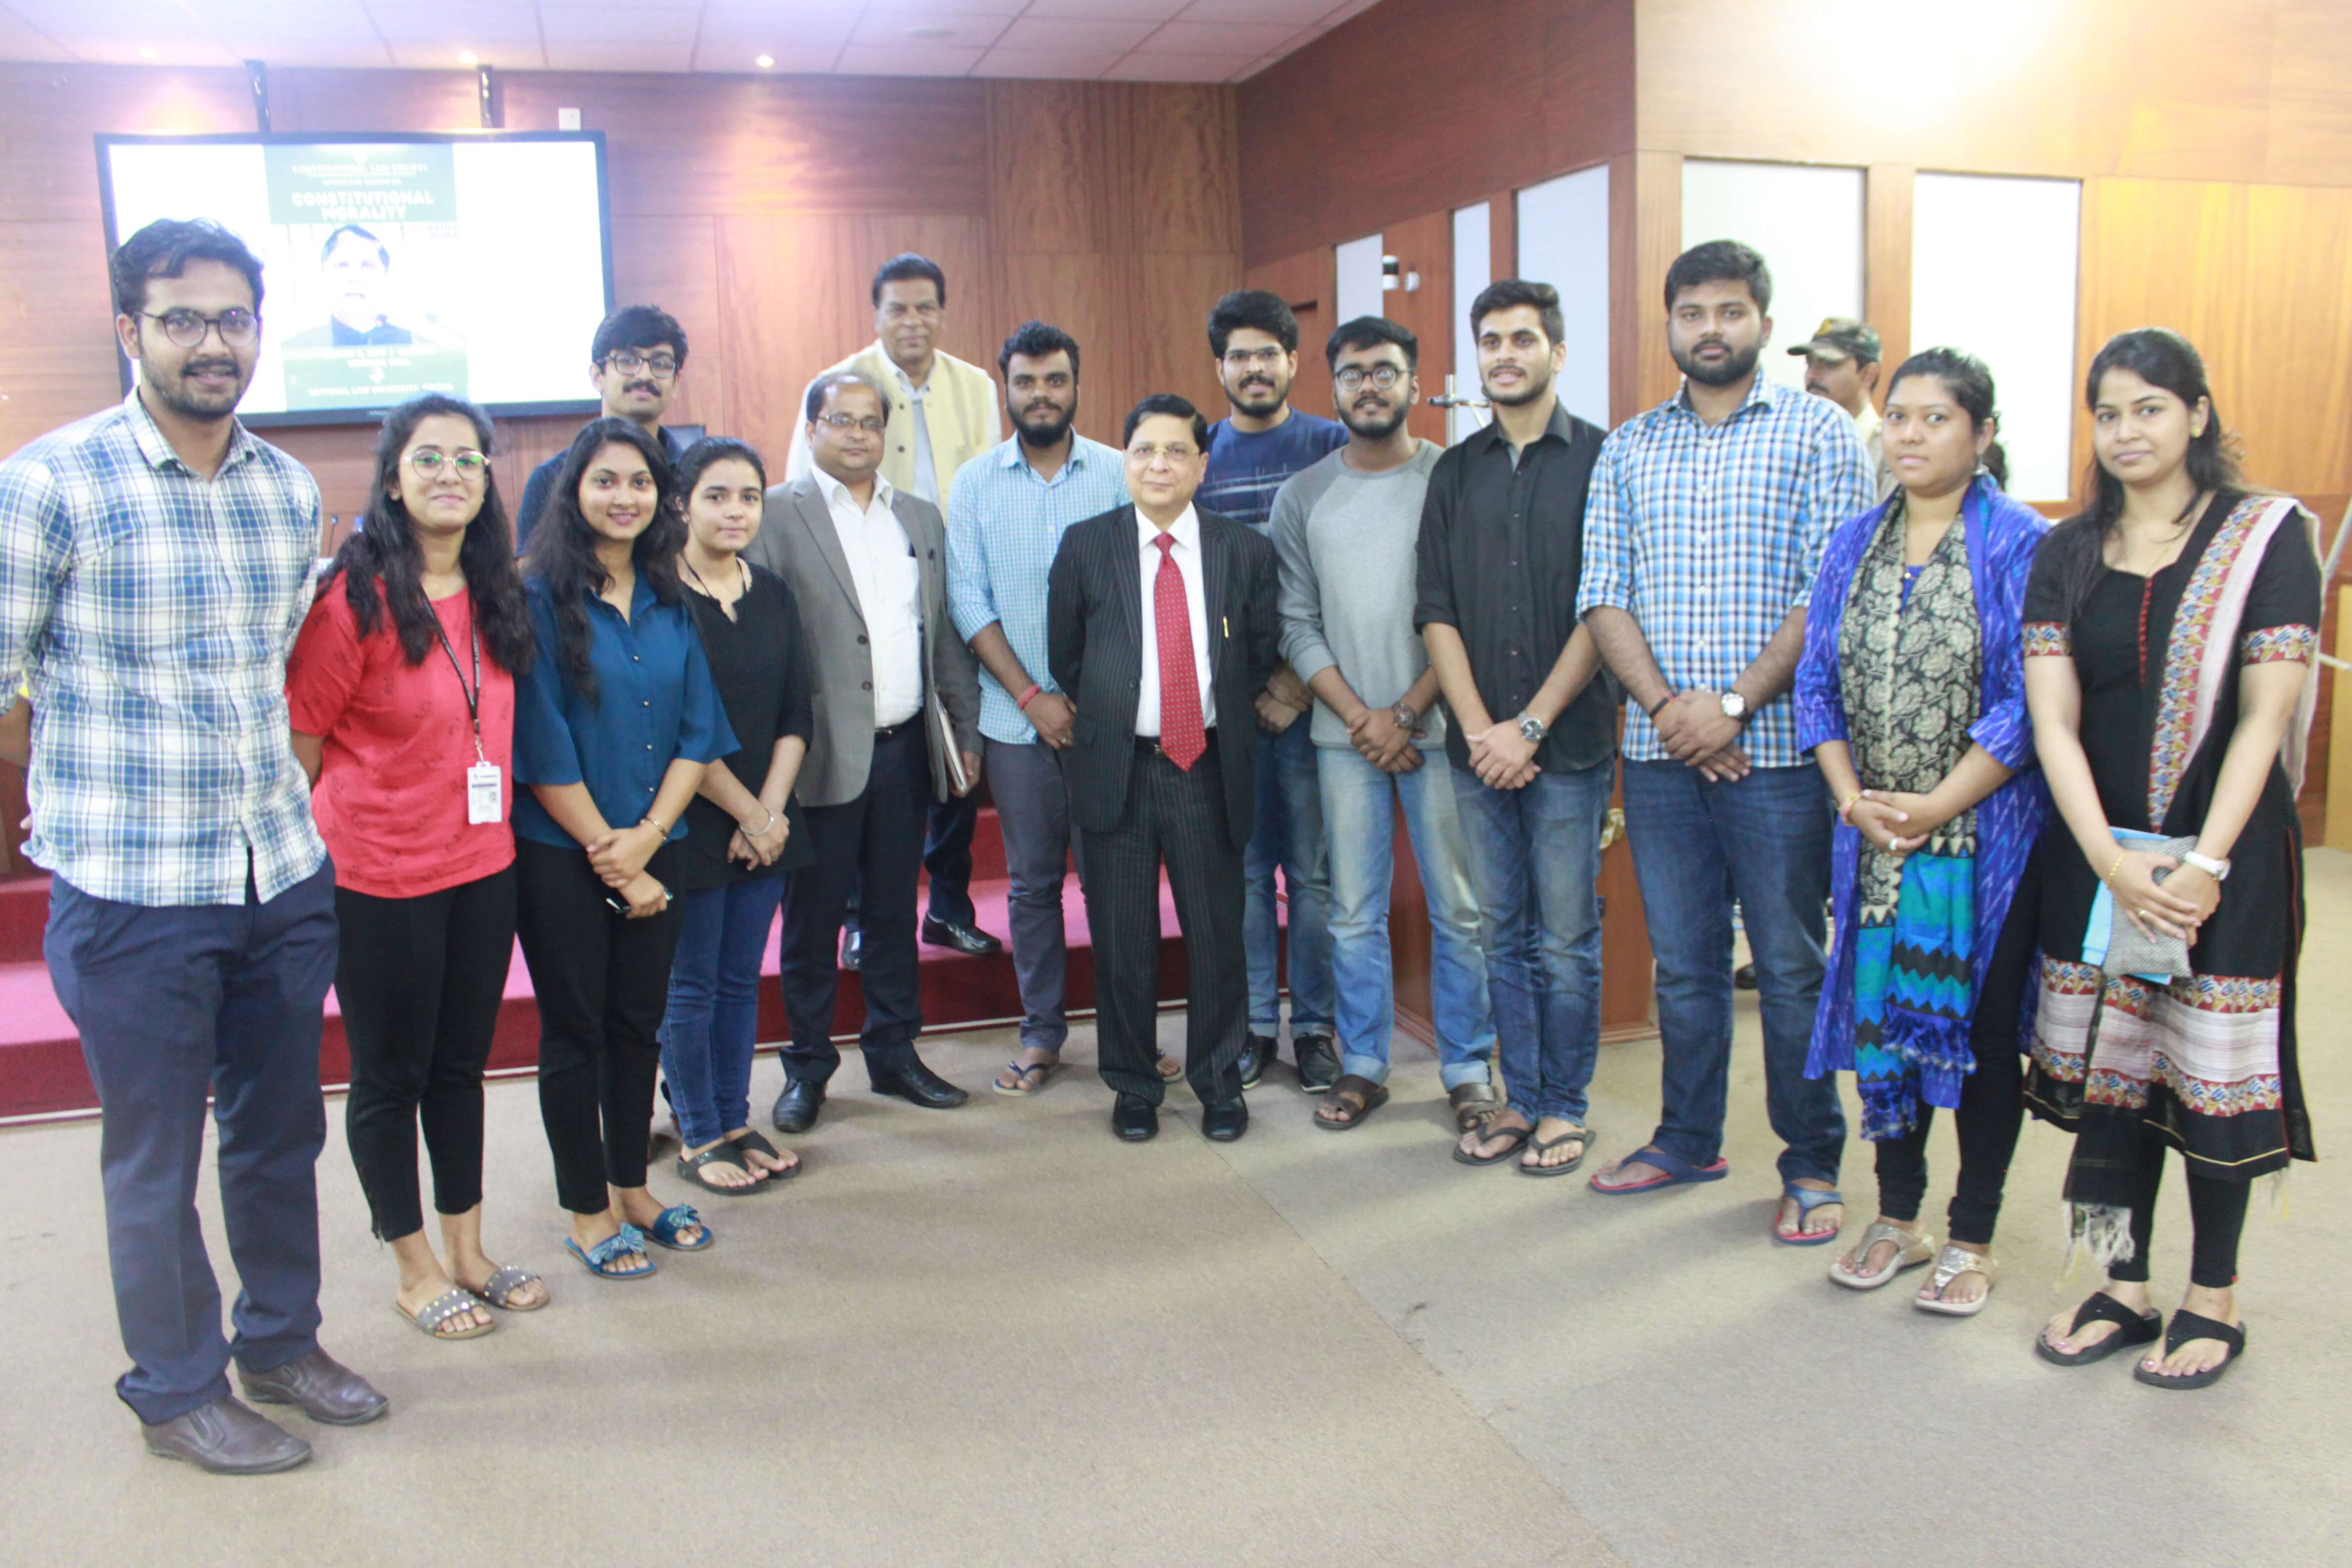 Interaction of Hon’ble Justice Dipak Misra with students and faculty members